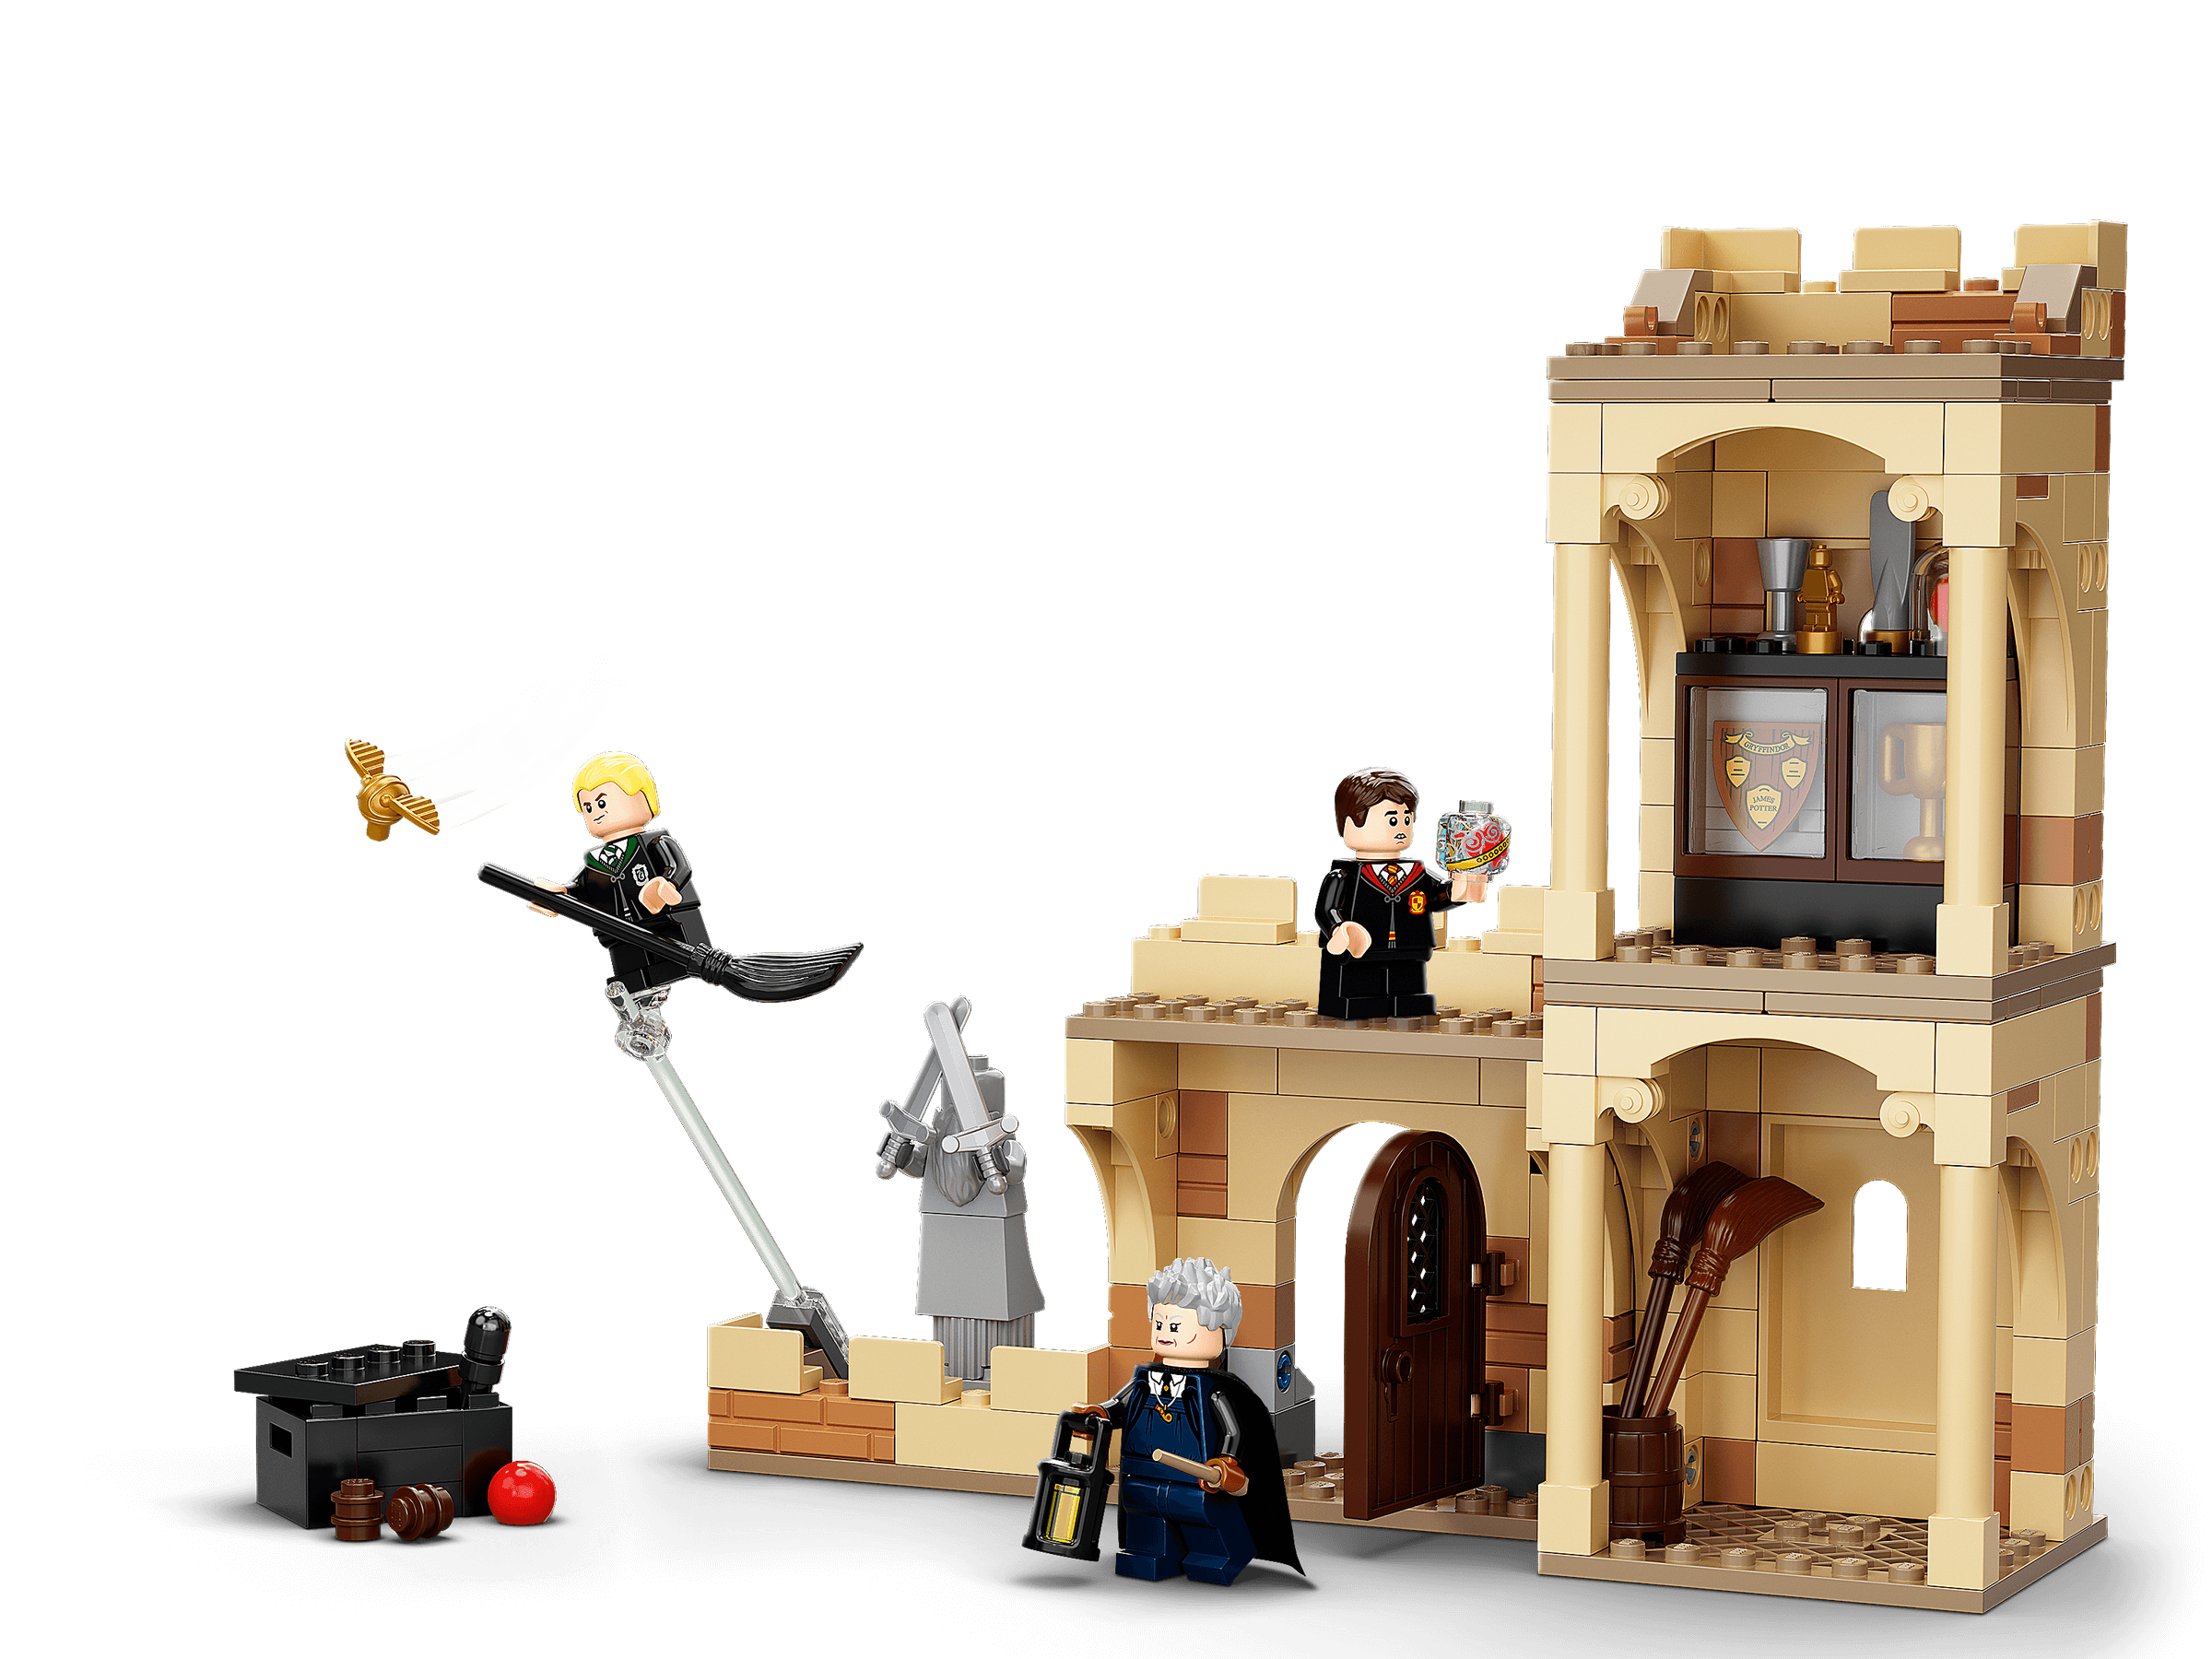 Lego Harry Potter 76395 Hogwarts First Flying Lesson Brand New